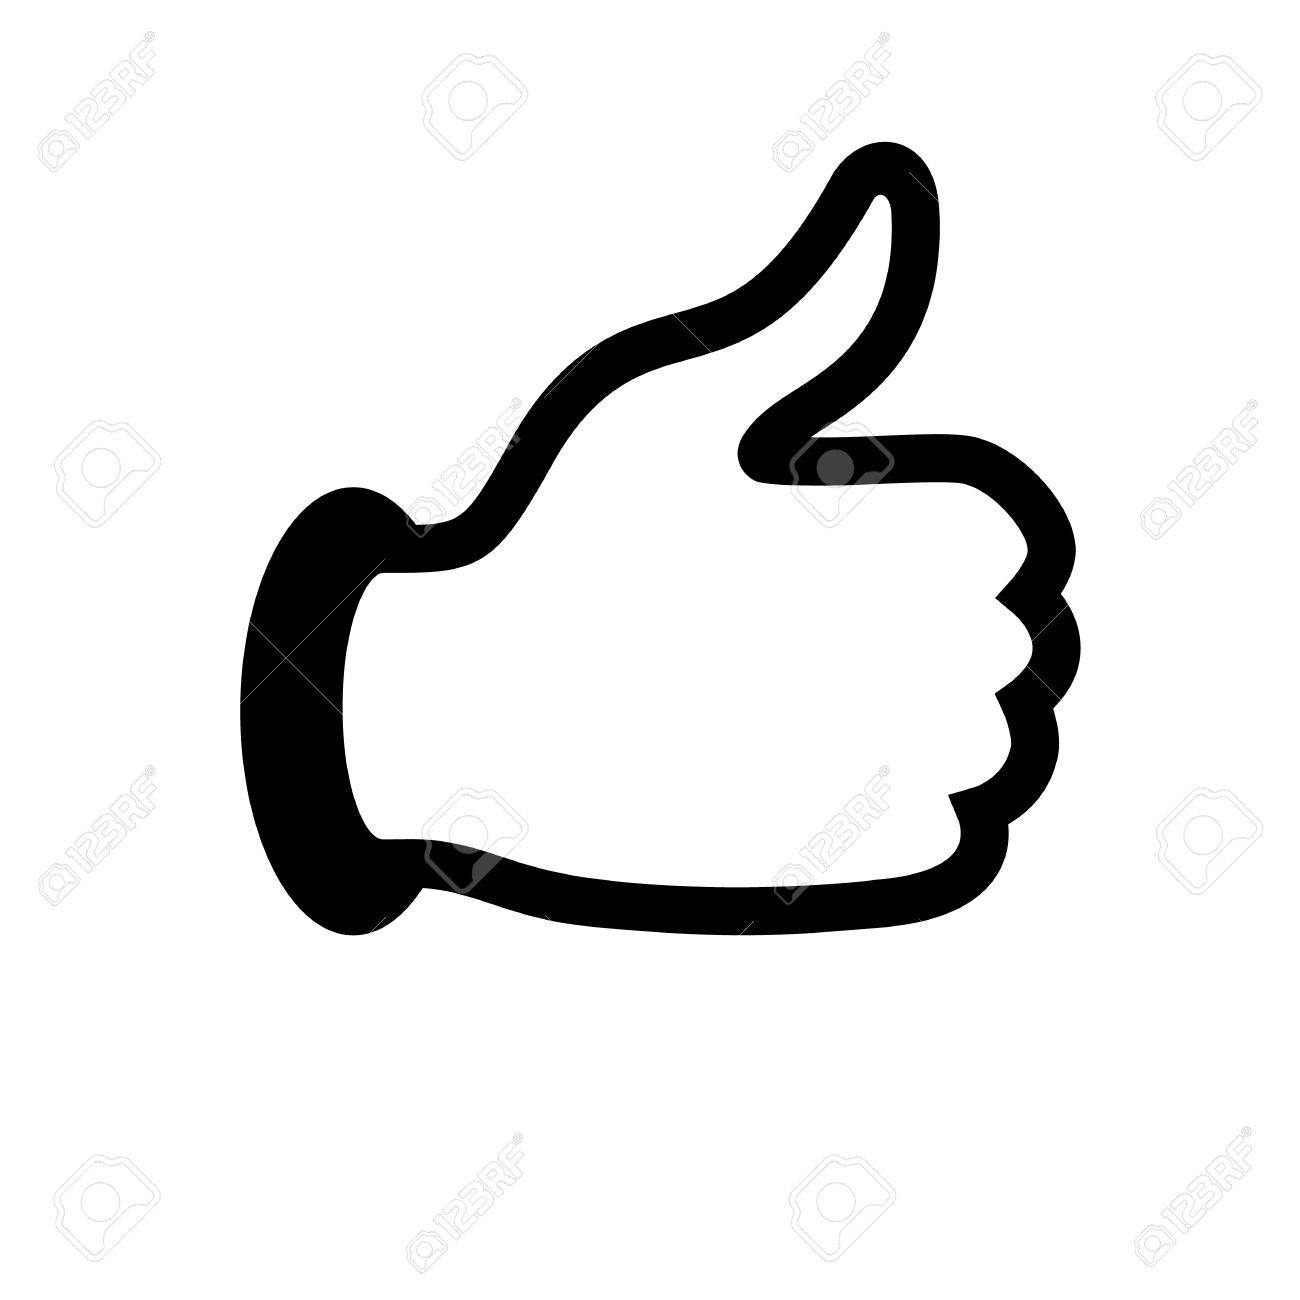 Vote thumbs up icon in black and white inverse Vector Image